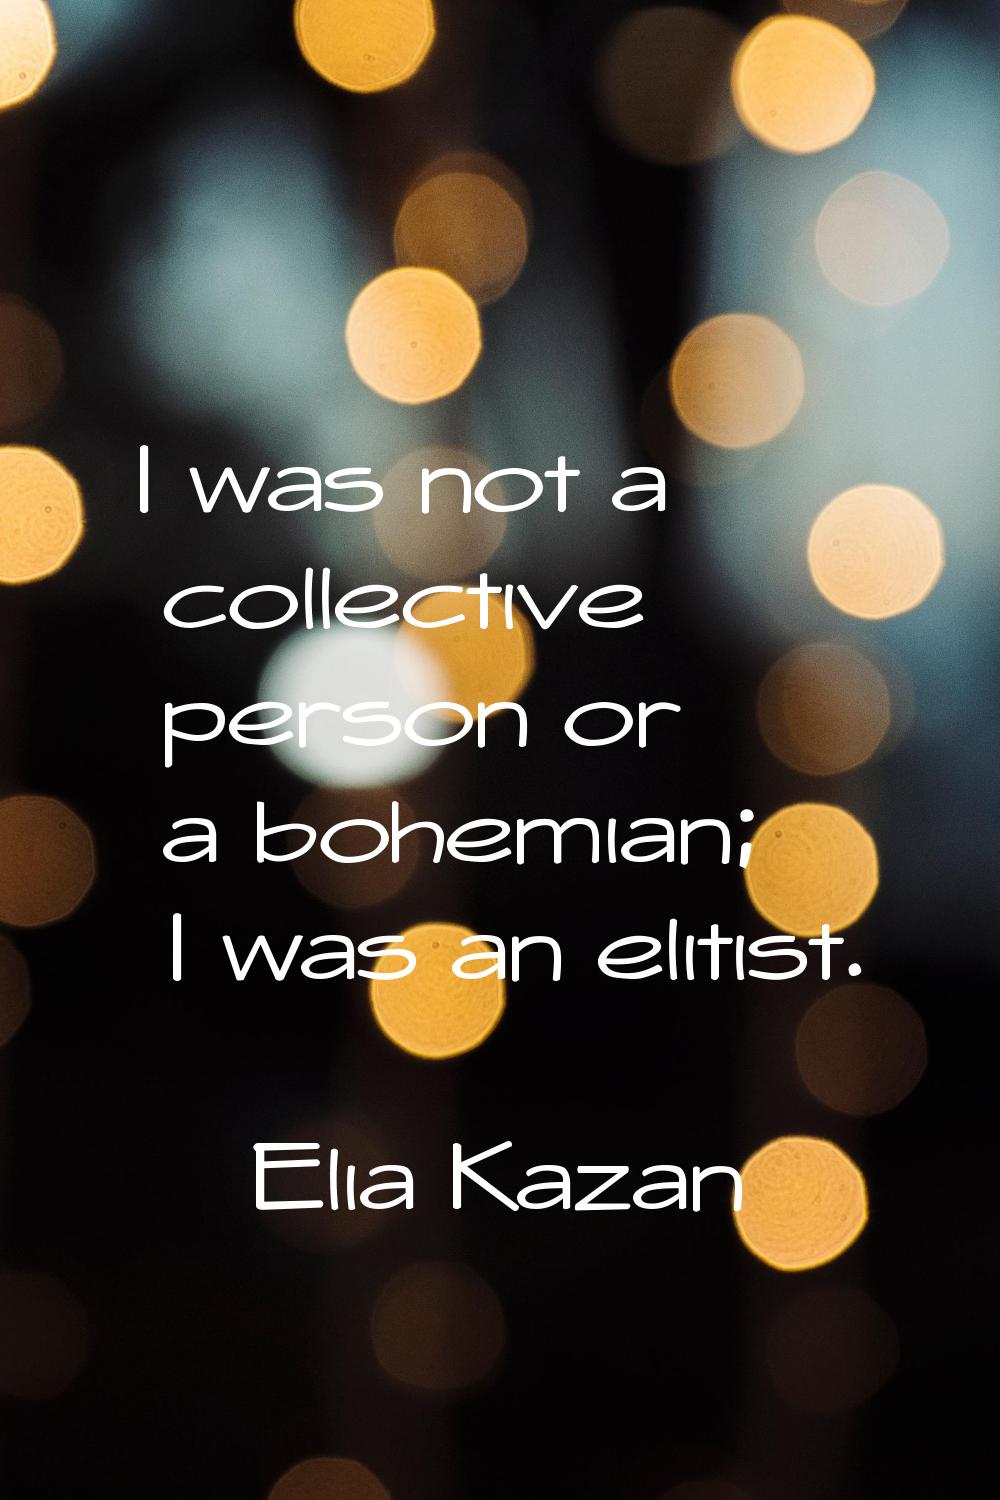 I was not a collective person or a bohemian; I was an elitist.